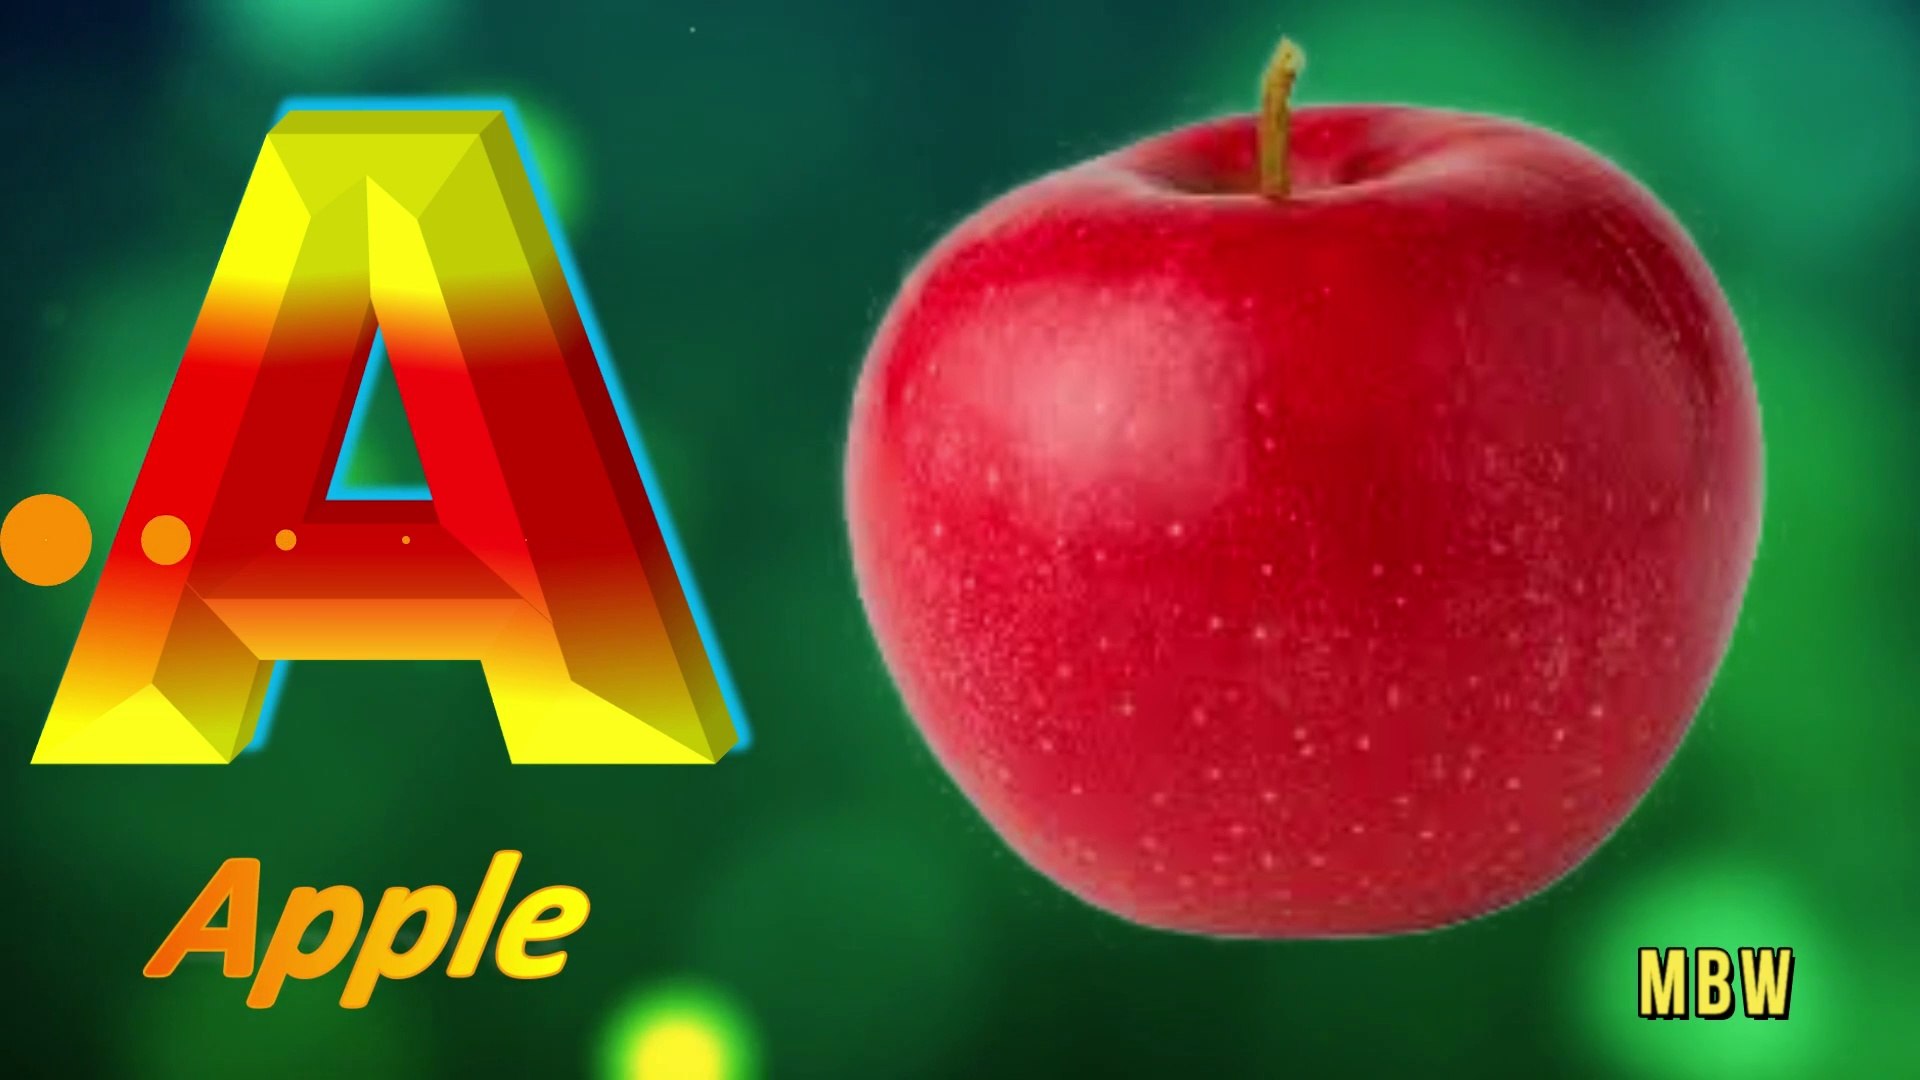 V110 ABCD|| ABC|| Alphabets|| A for apple b for ball c for cat d for dog |  1234, 12345, abcd songs - video Dailymotion